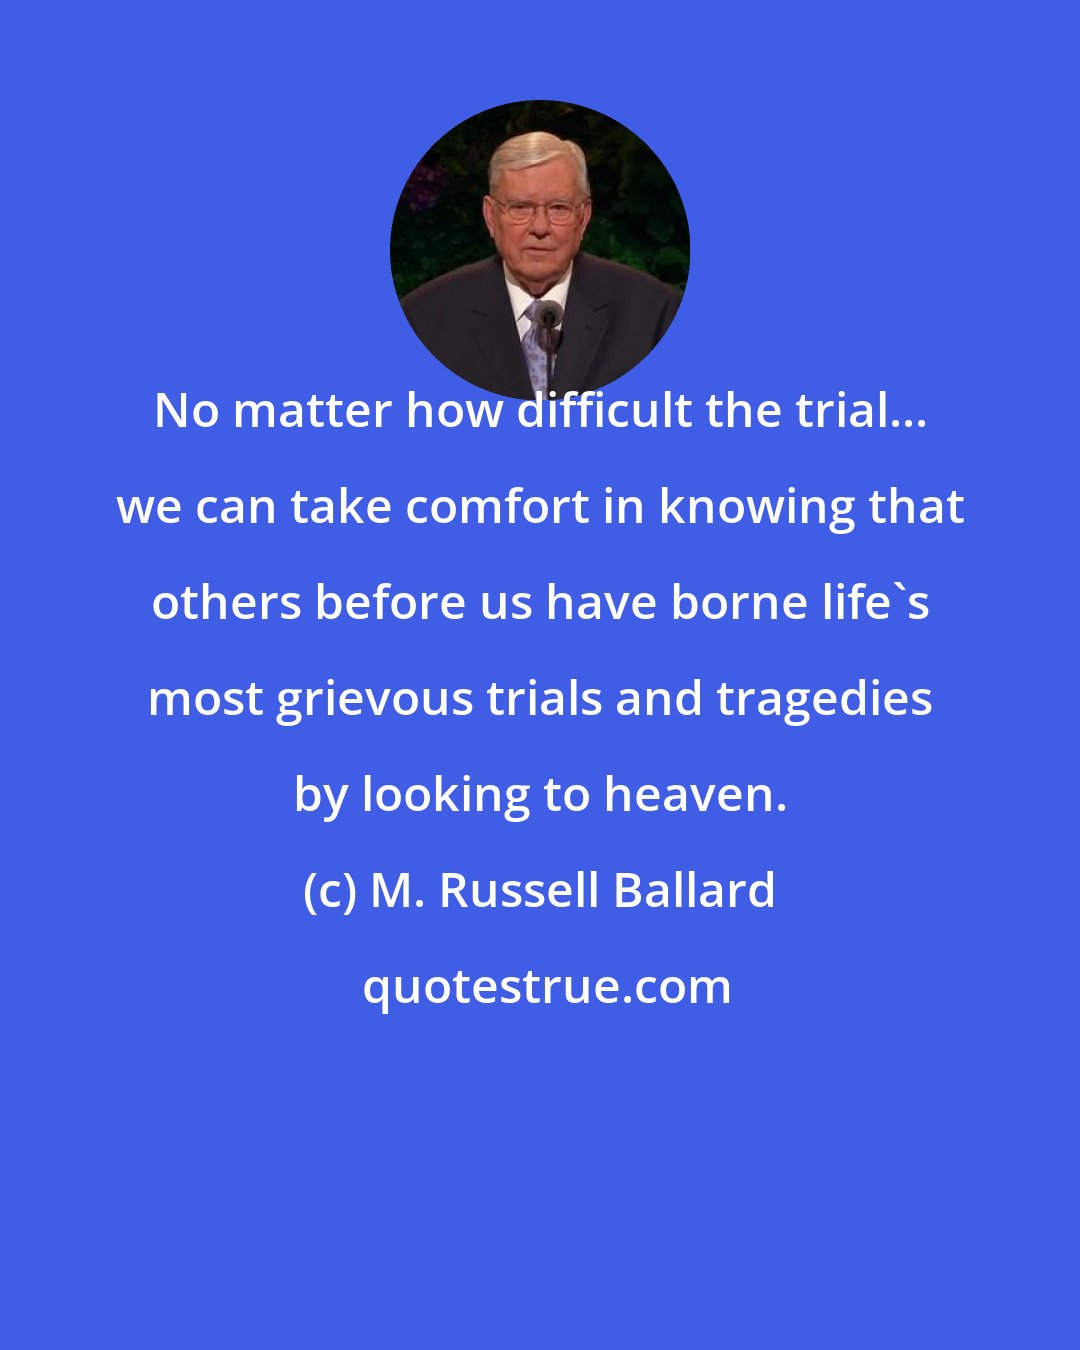 M. Russell Ballard: No matter how difficult the trial... we can take comfort in knowing that others before us have borne life's most grievous trials and tragedies by looking to heaven.